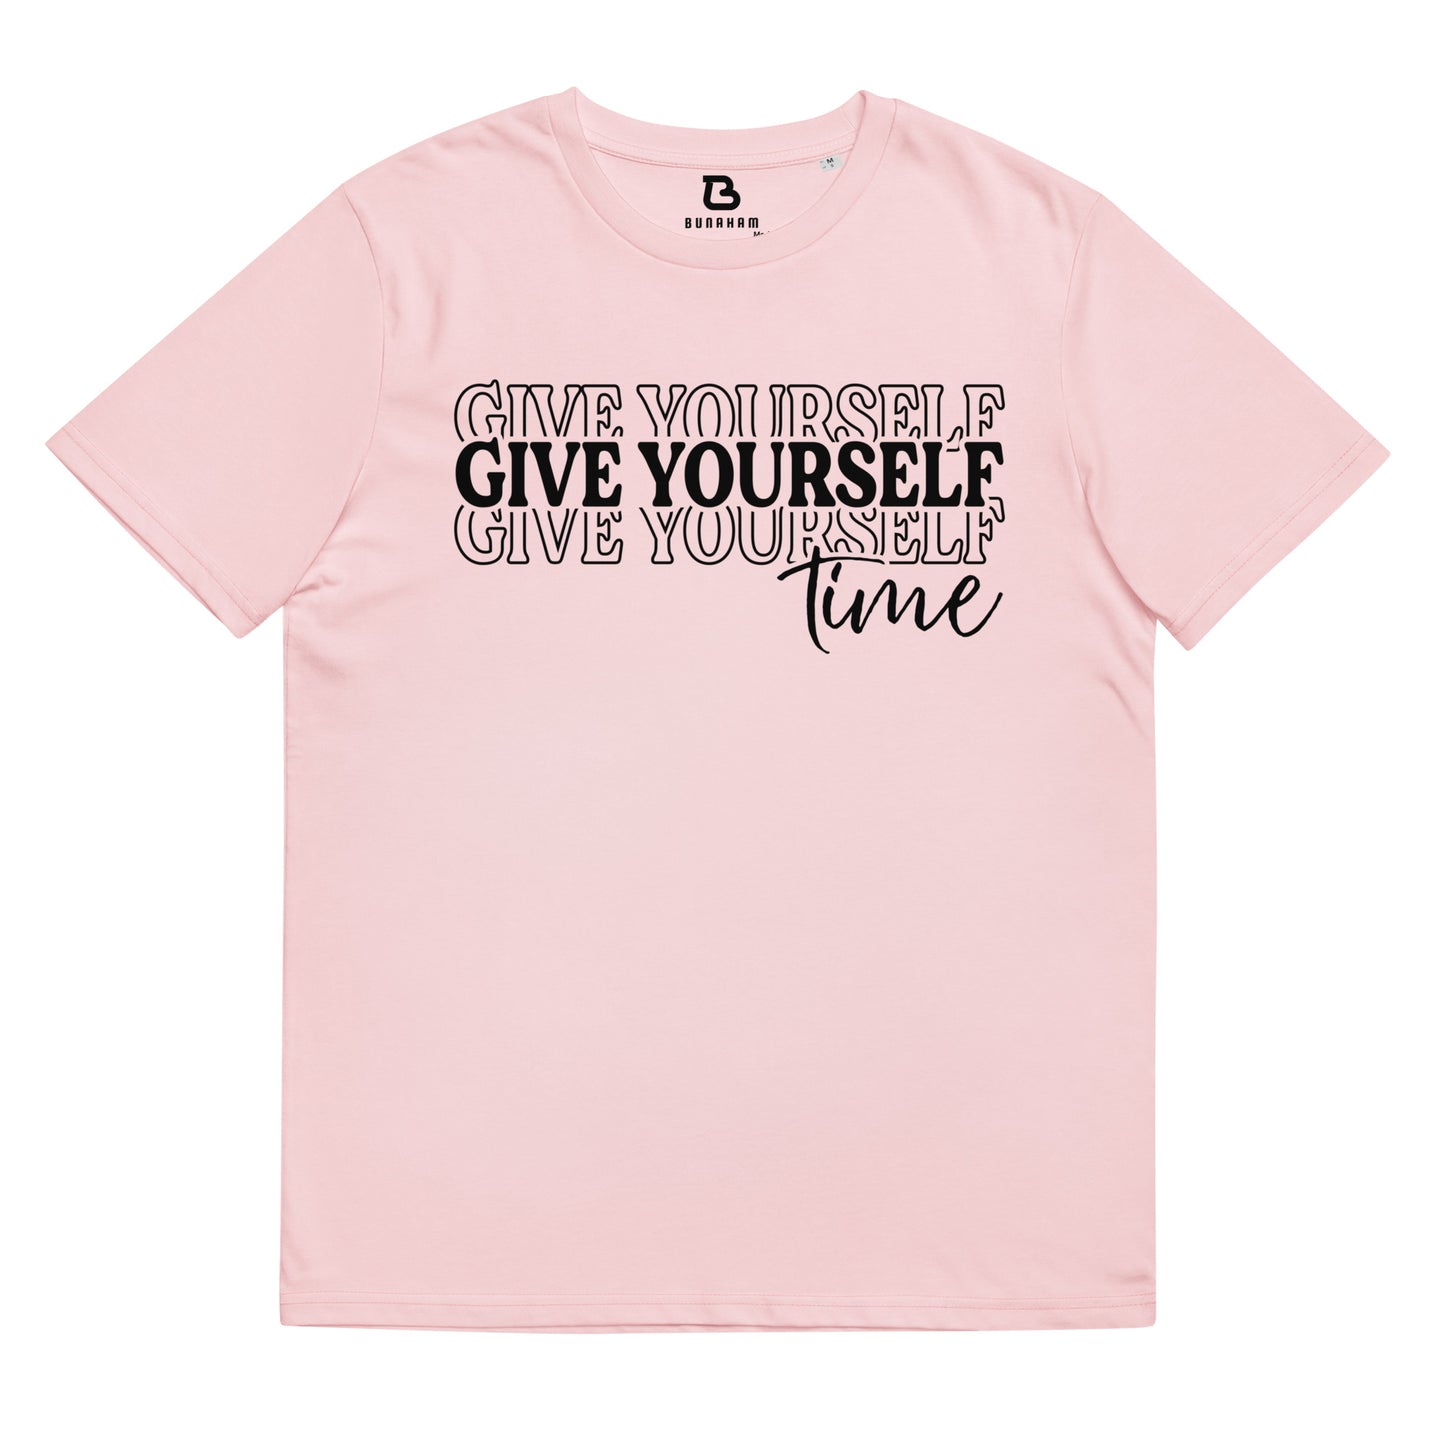 Unisex Organic Cotton T-shirt - Give Yourself Time